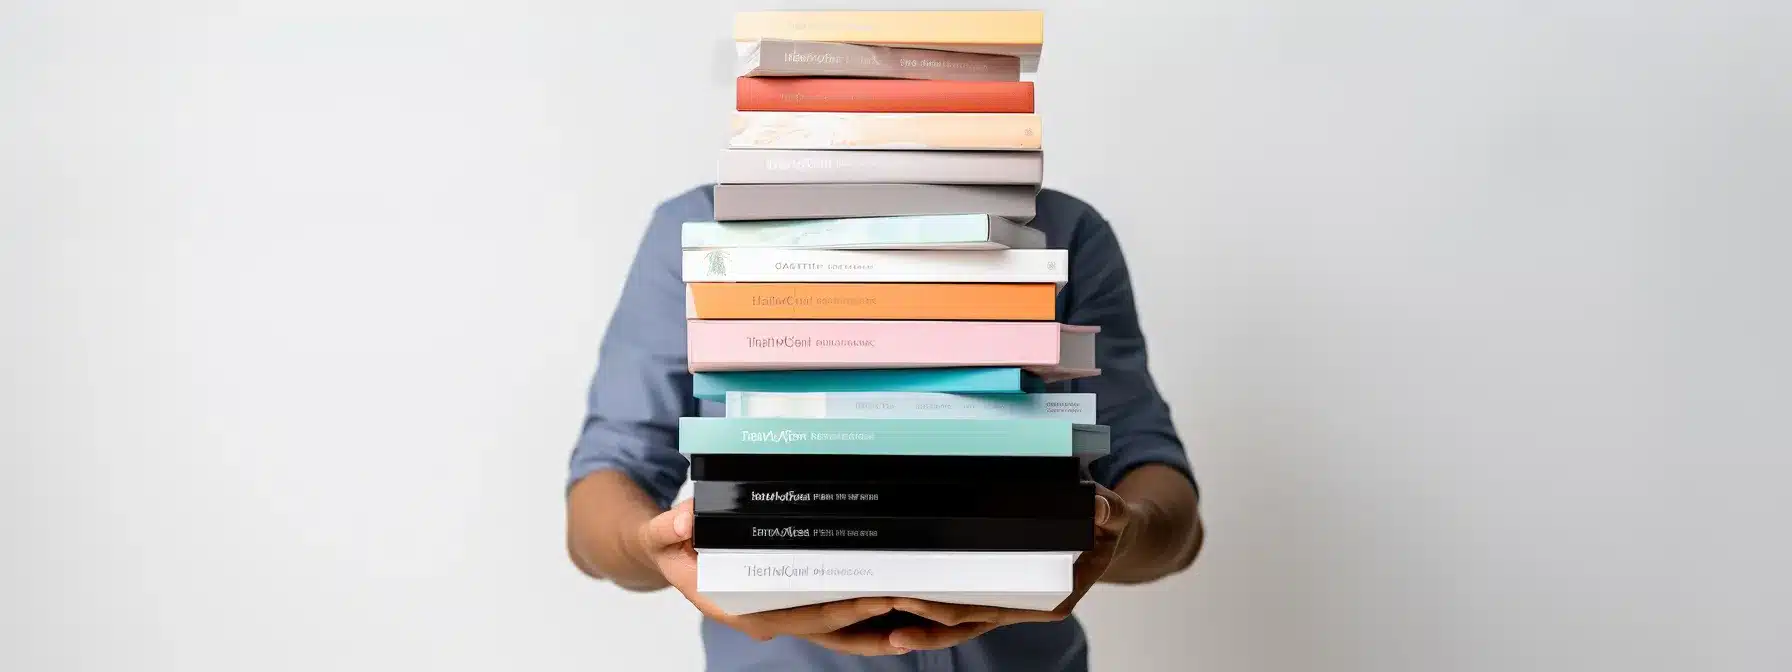 A Person Holding A Stack Of Corporate Branding Books, Surrounded By A White Background.